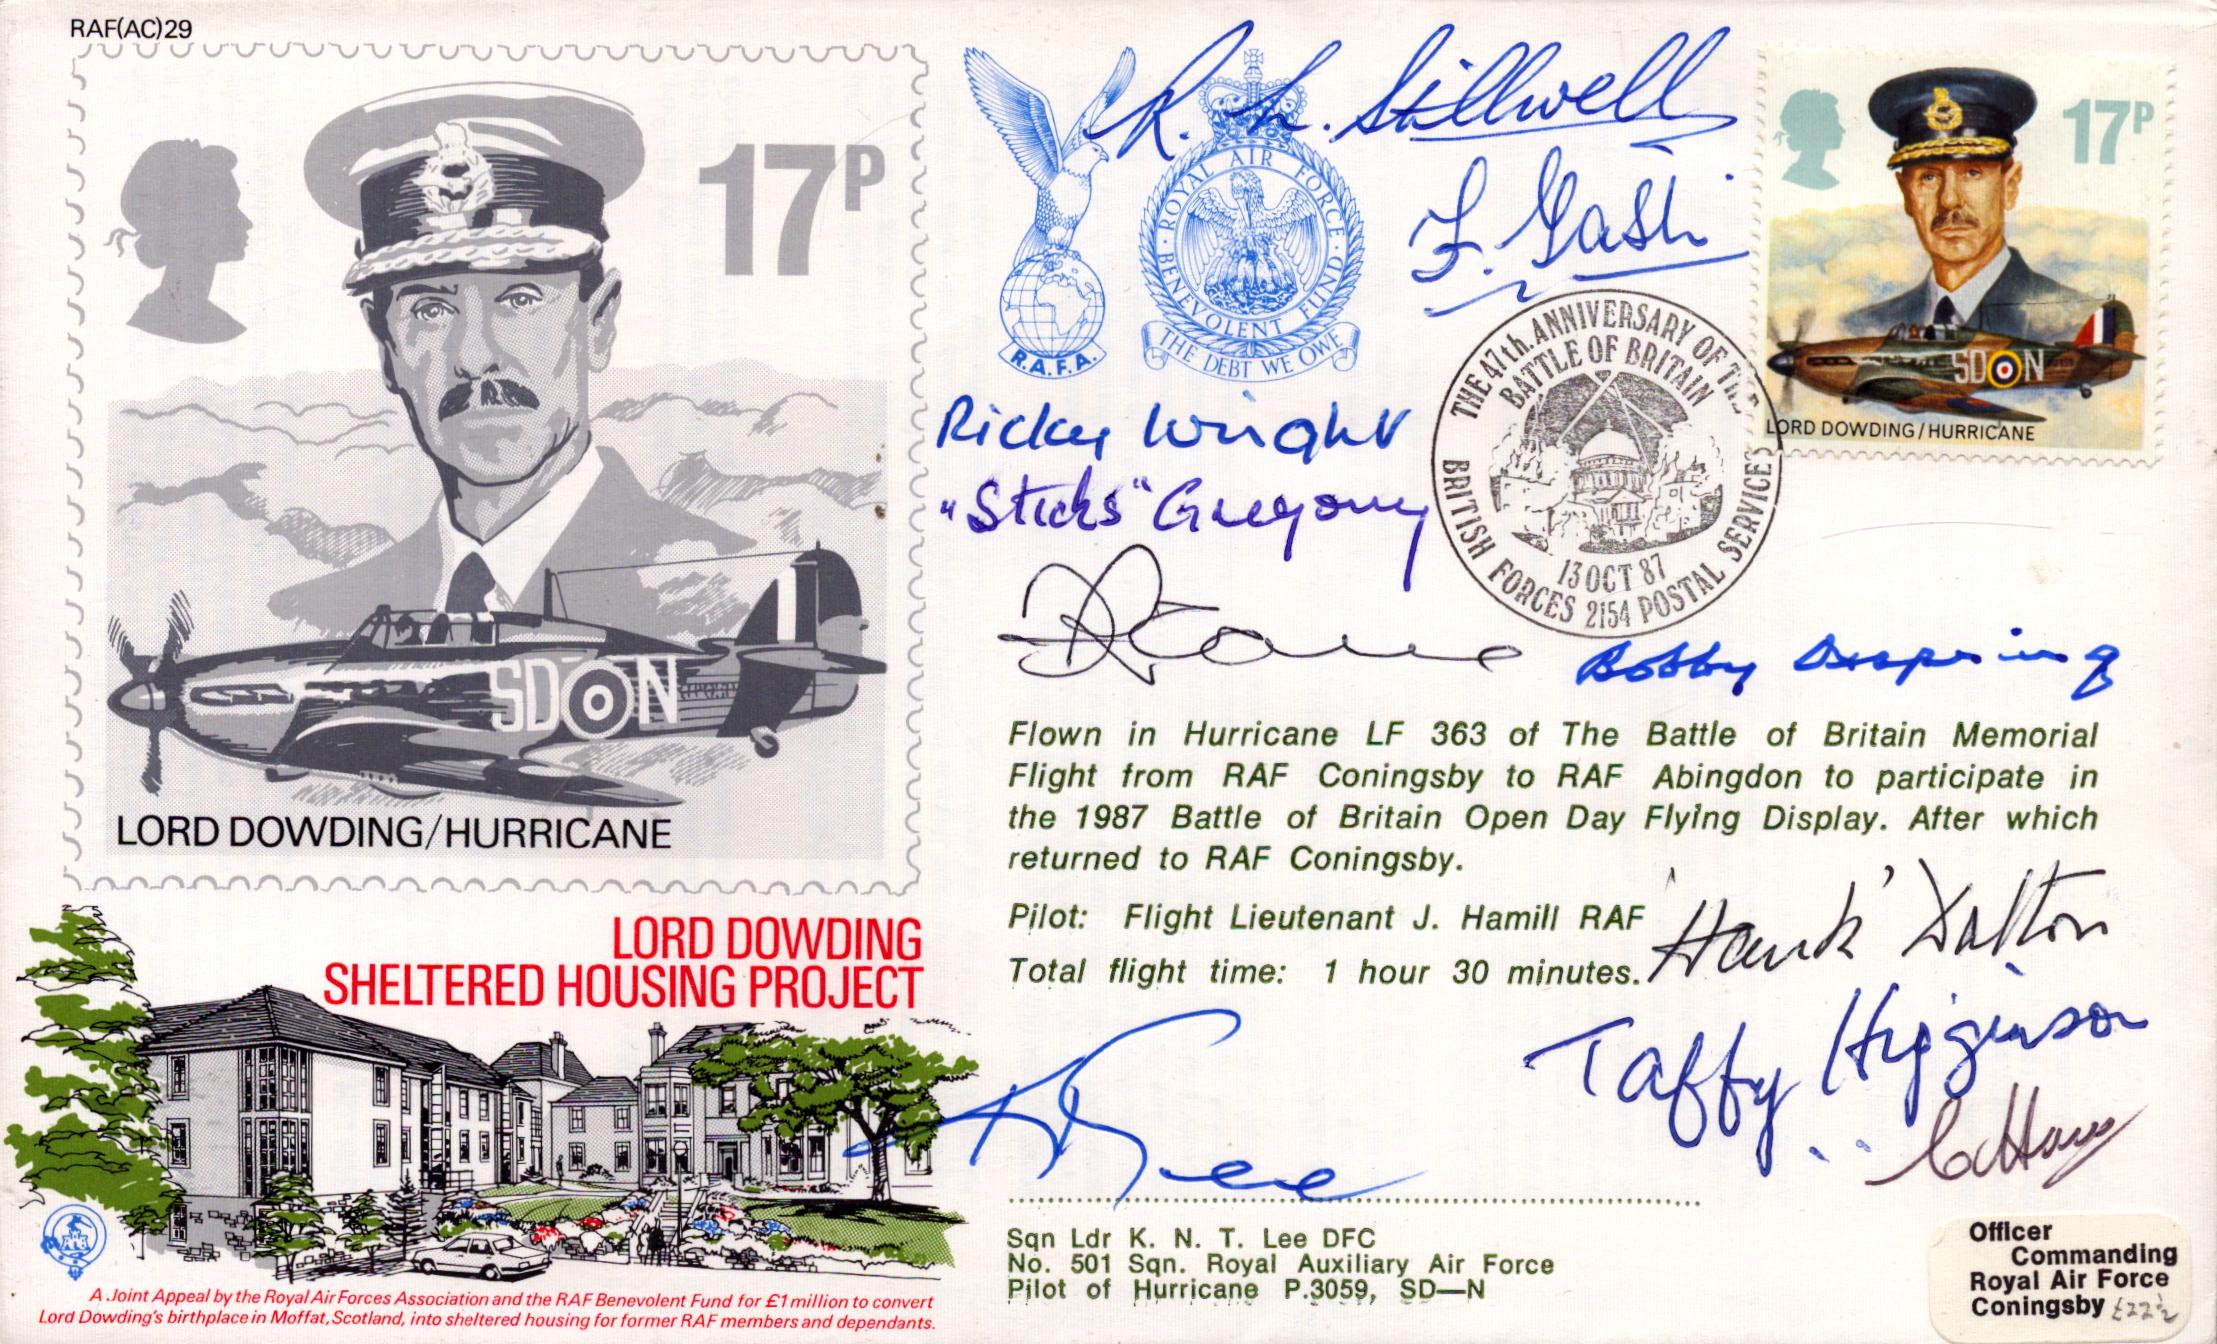 WWII veterans multi signed Lord Dowding/Hurricane Lord Dowding Sheltered Housing Project FDC - Image 2 of 3